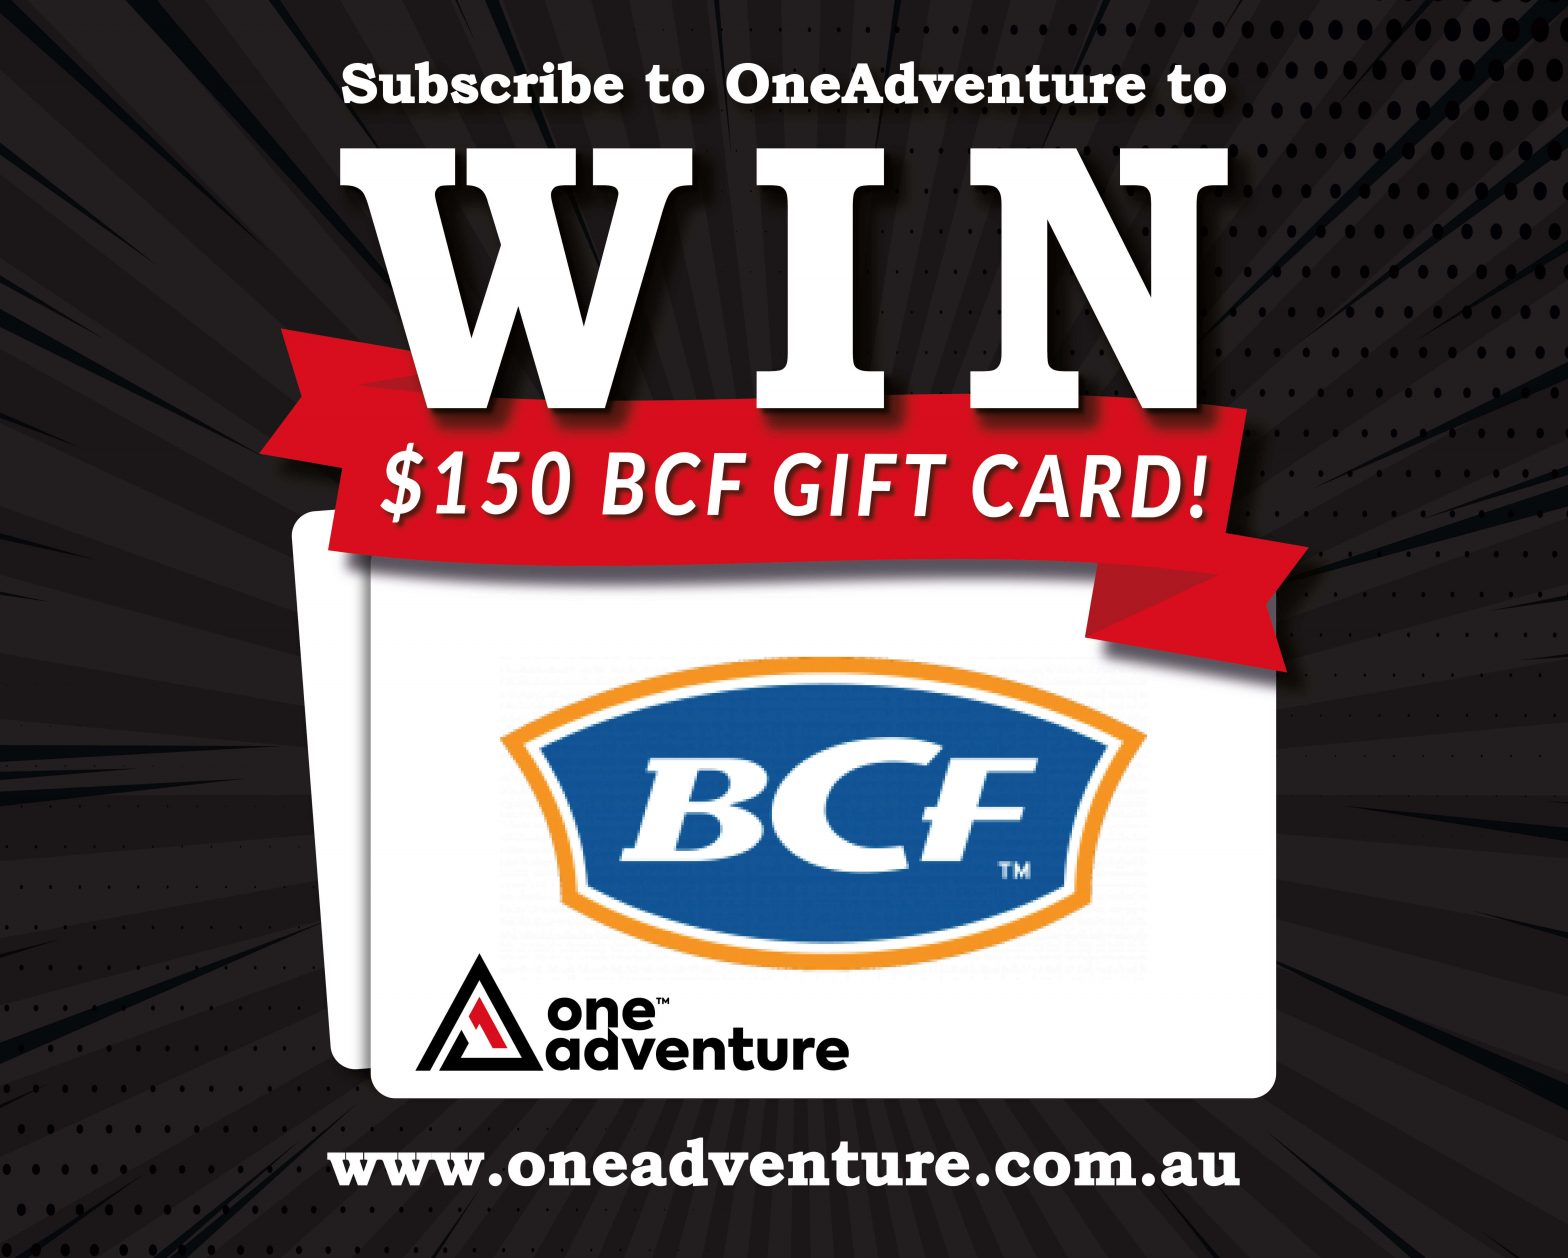 Preview of the $150 BCF gift card prize